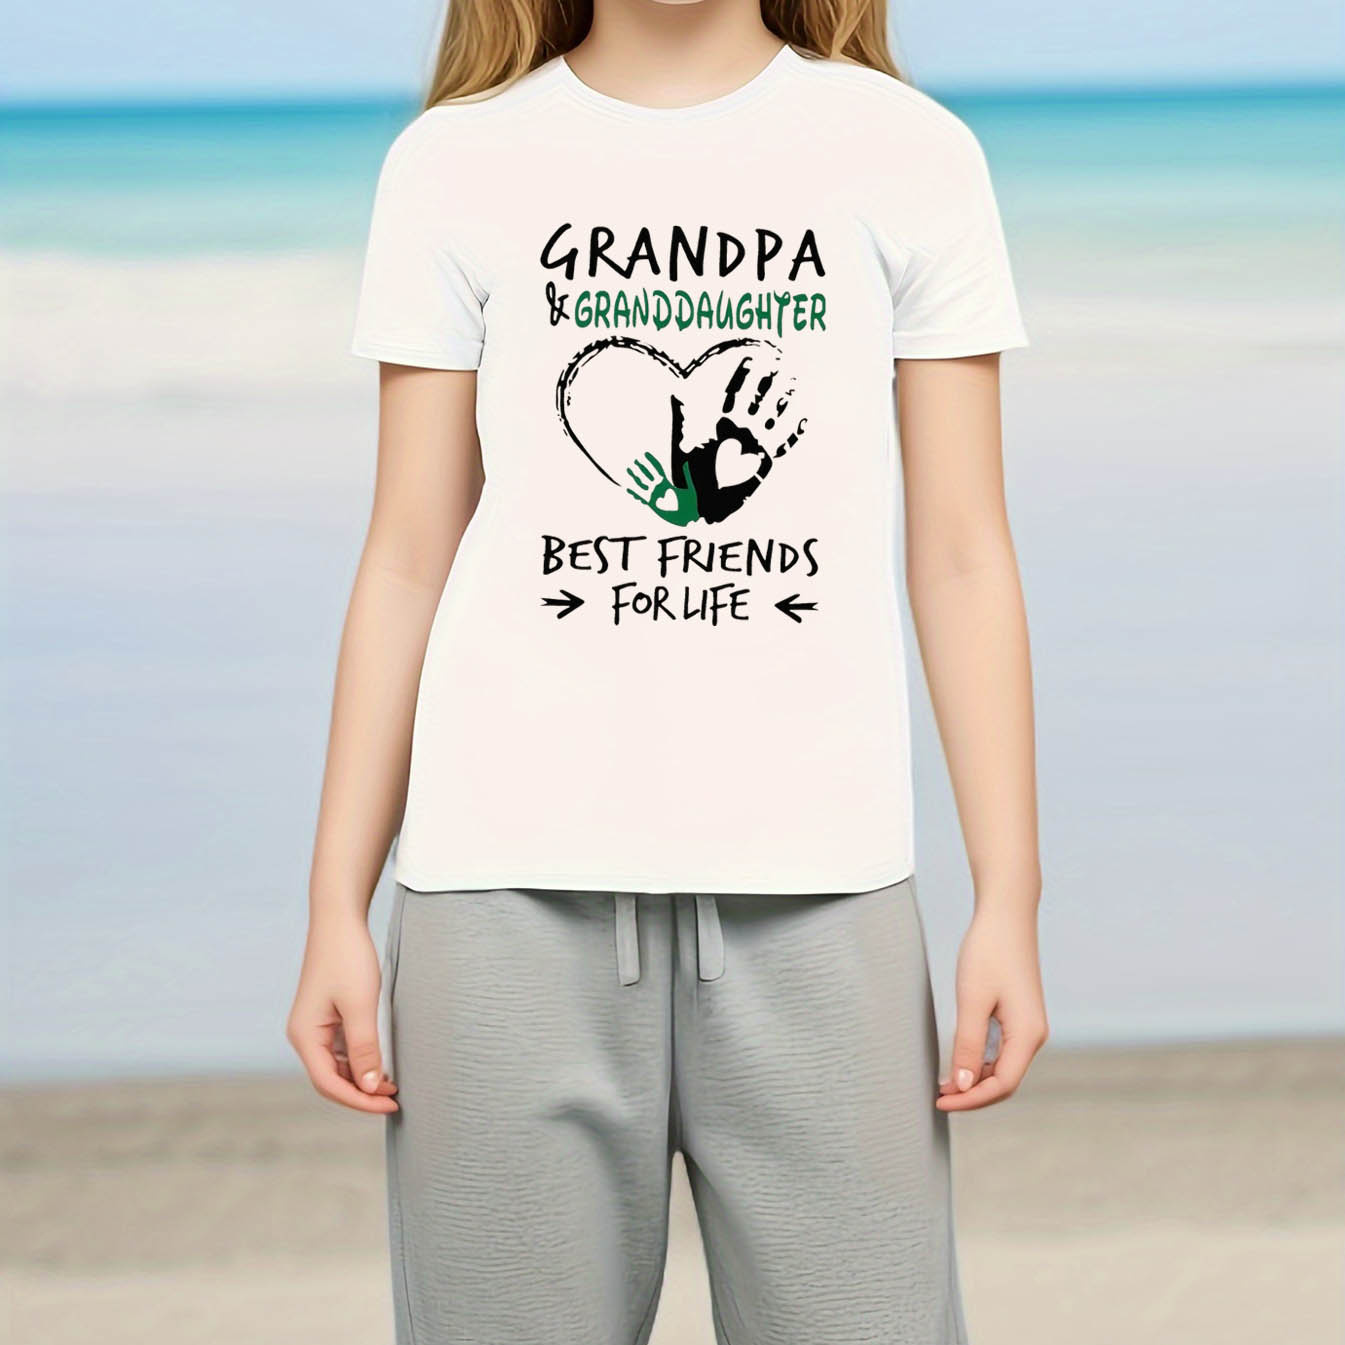 

Grandpa & Granddaughter And Hand Prints Graphic Print, Girls' Comfy & Loose T-shirts, Top Clothes For Spring & Summer For Outdoor Activities